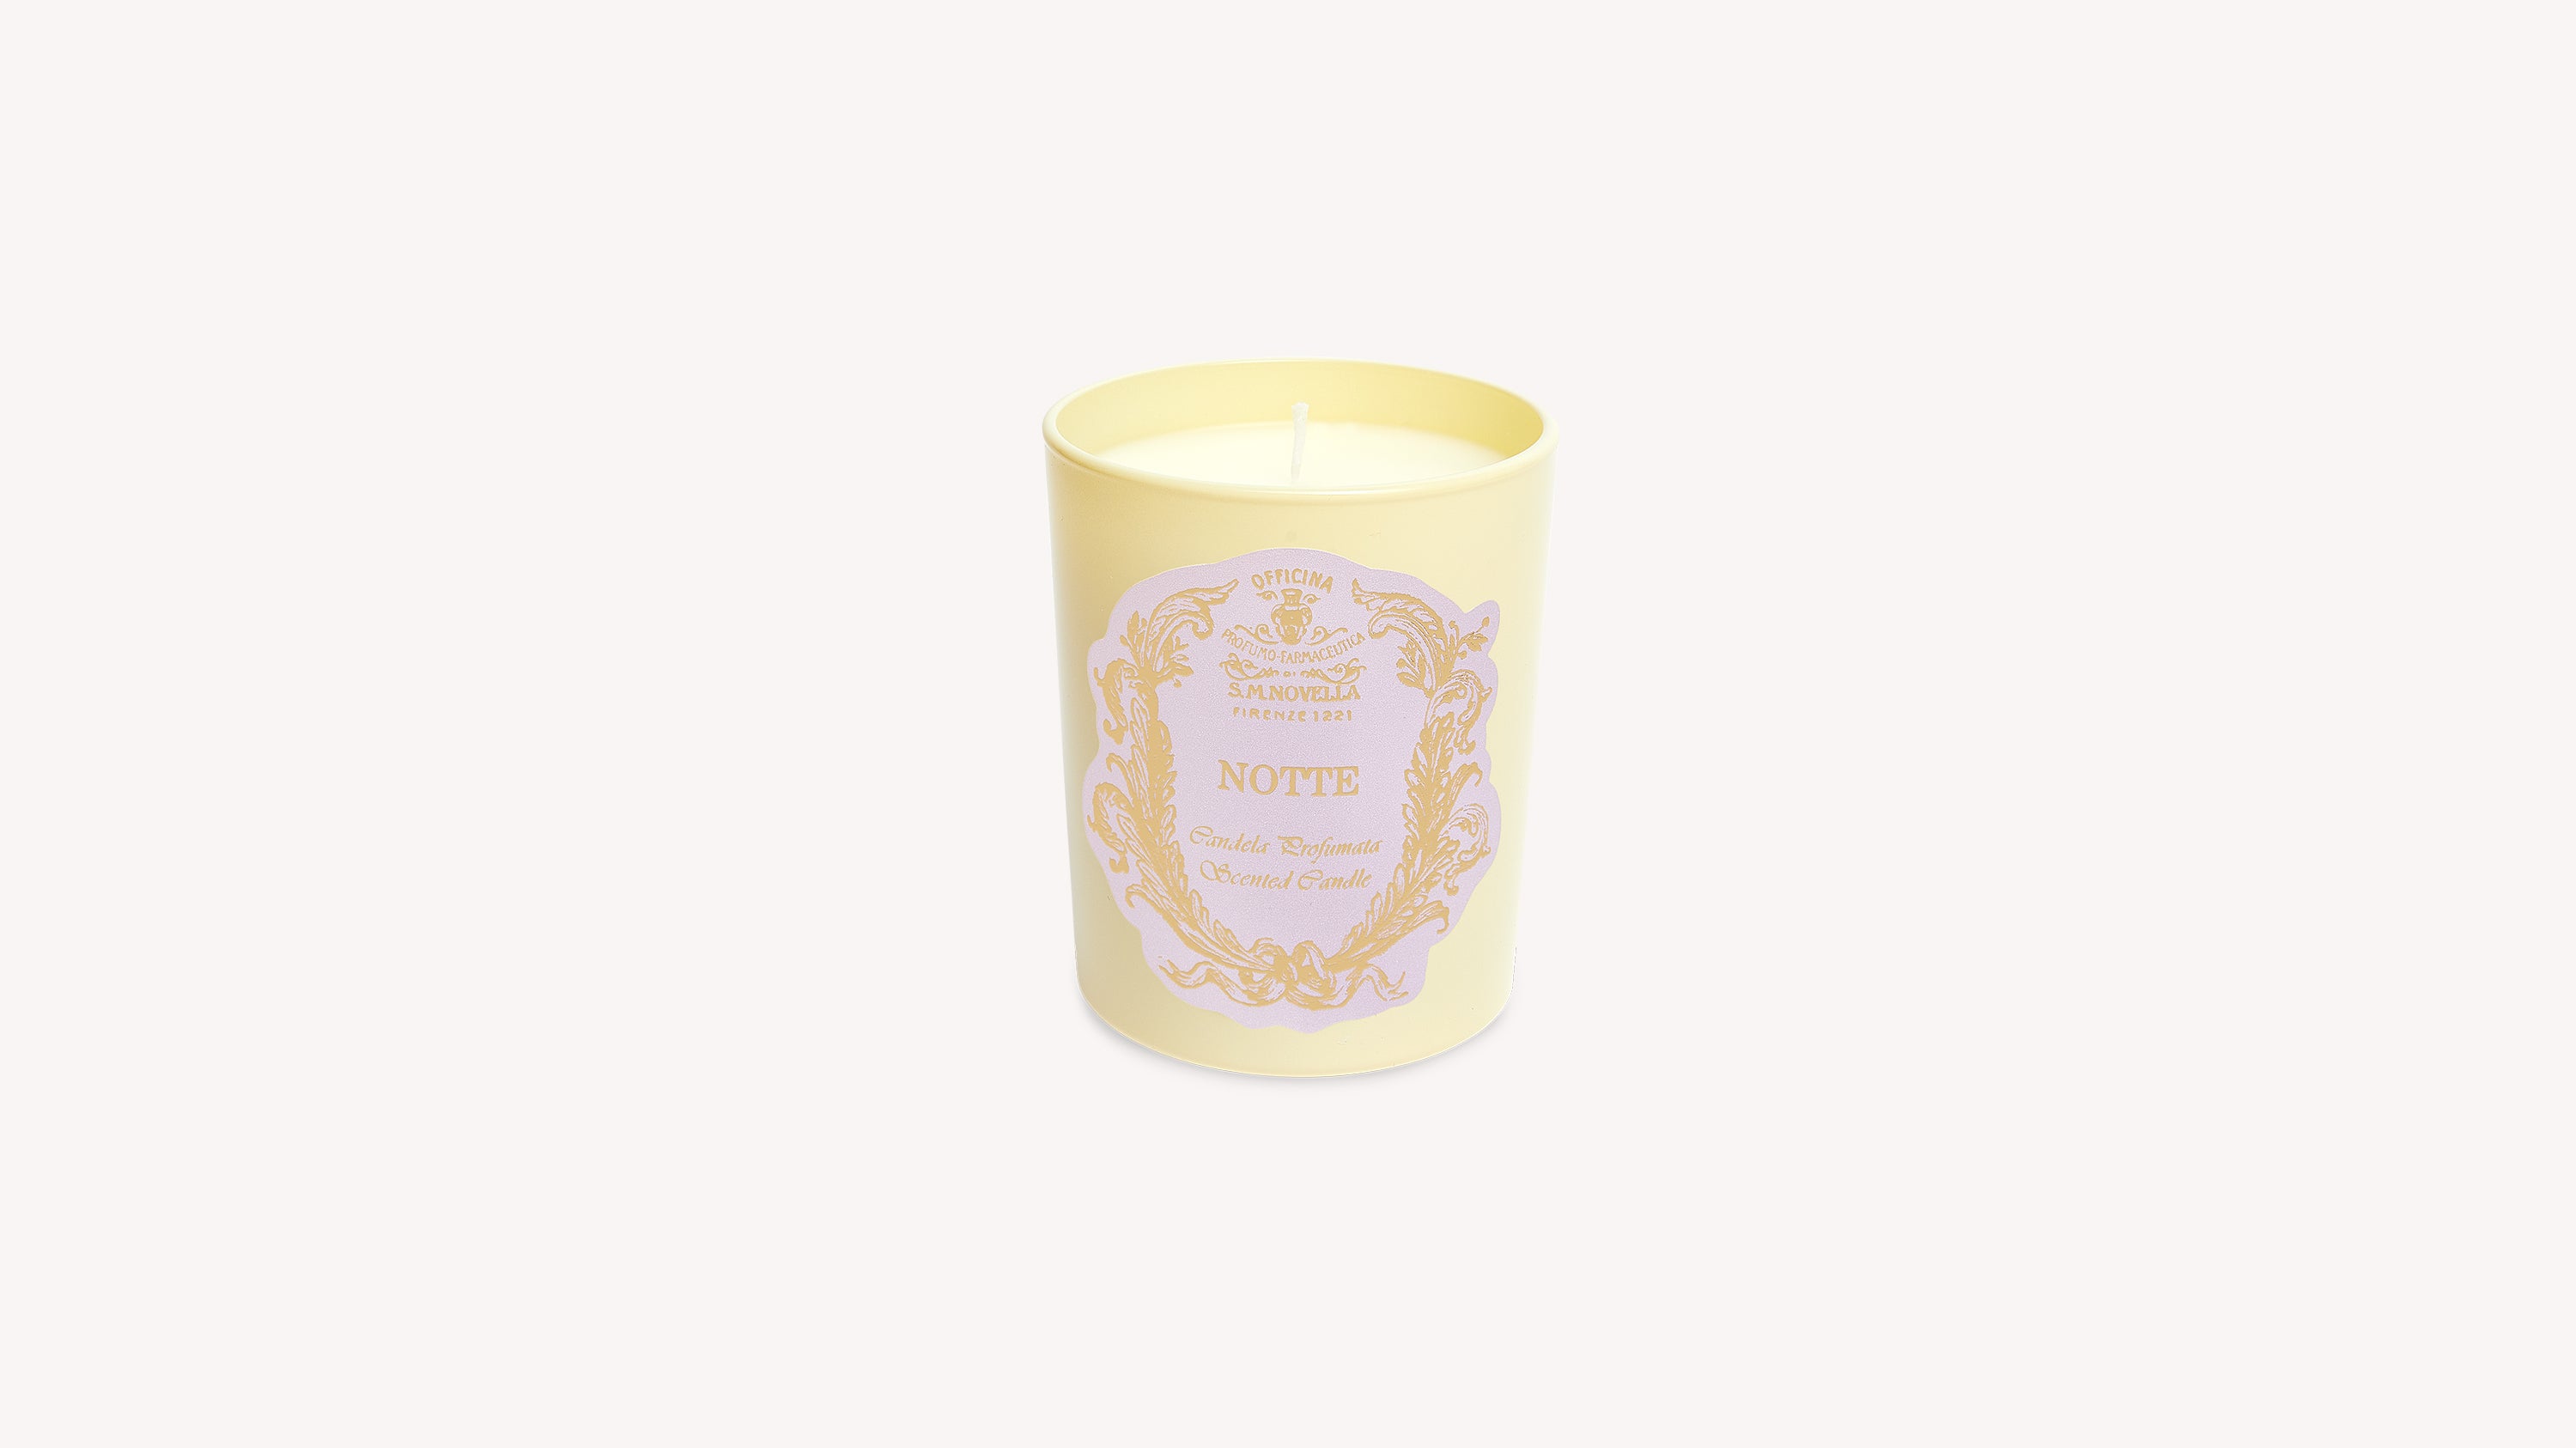 Notte Scented Candle